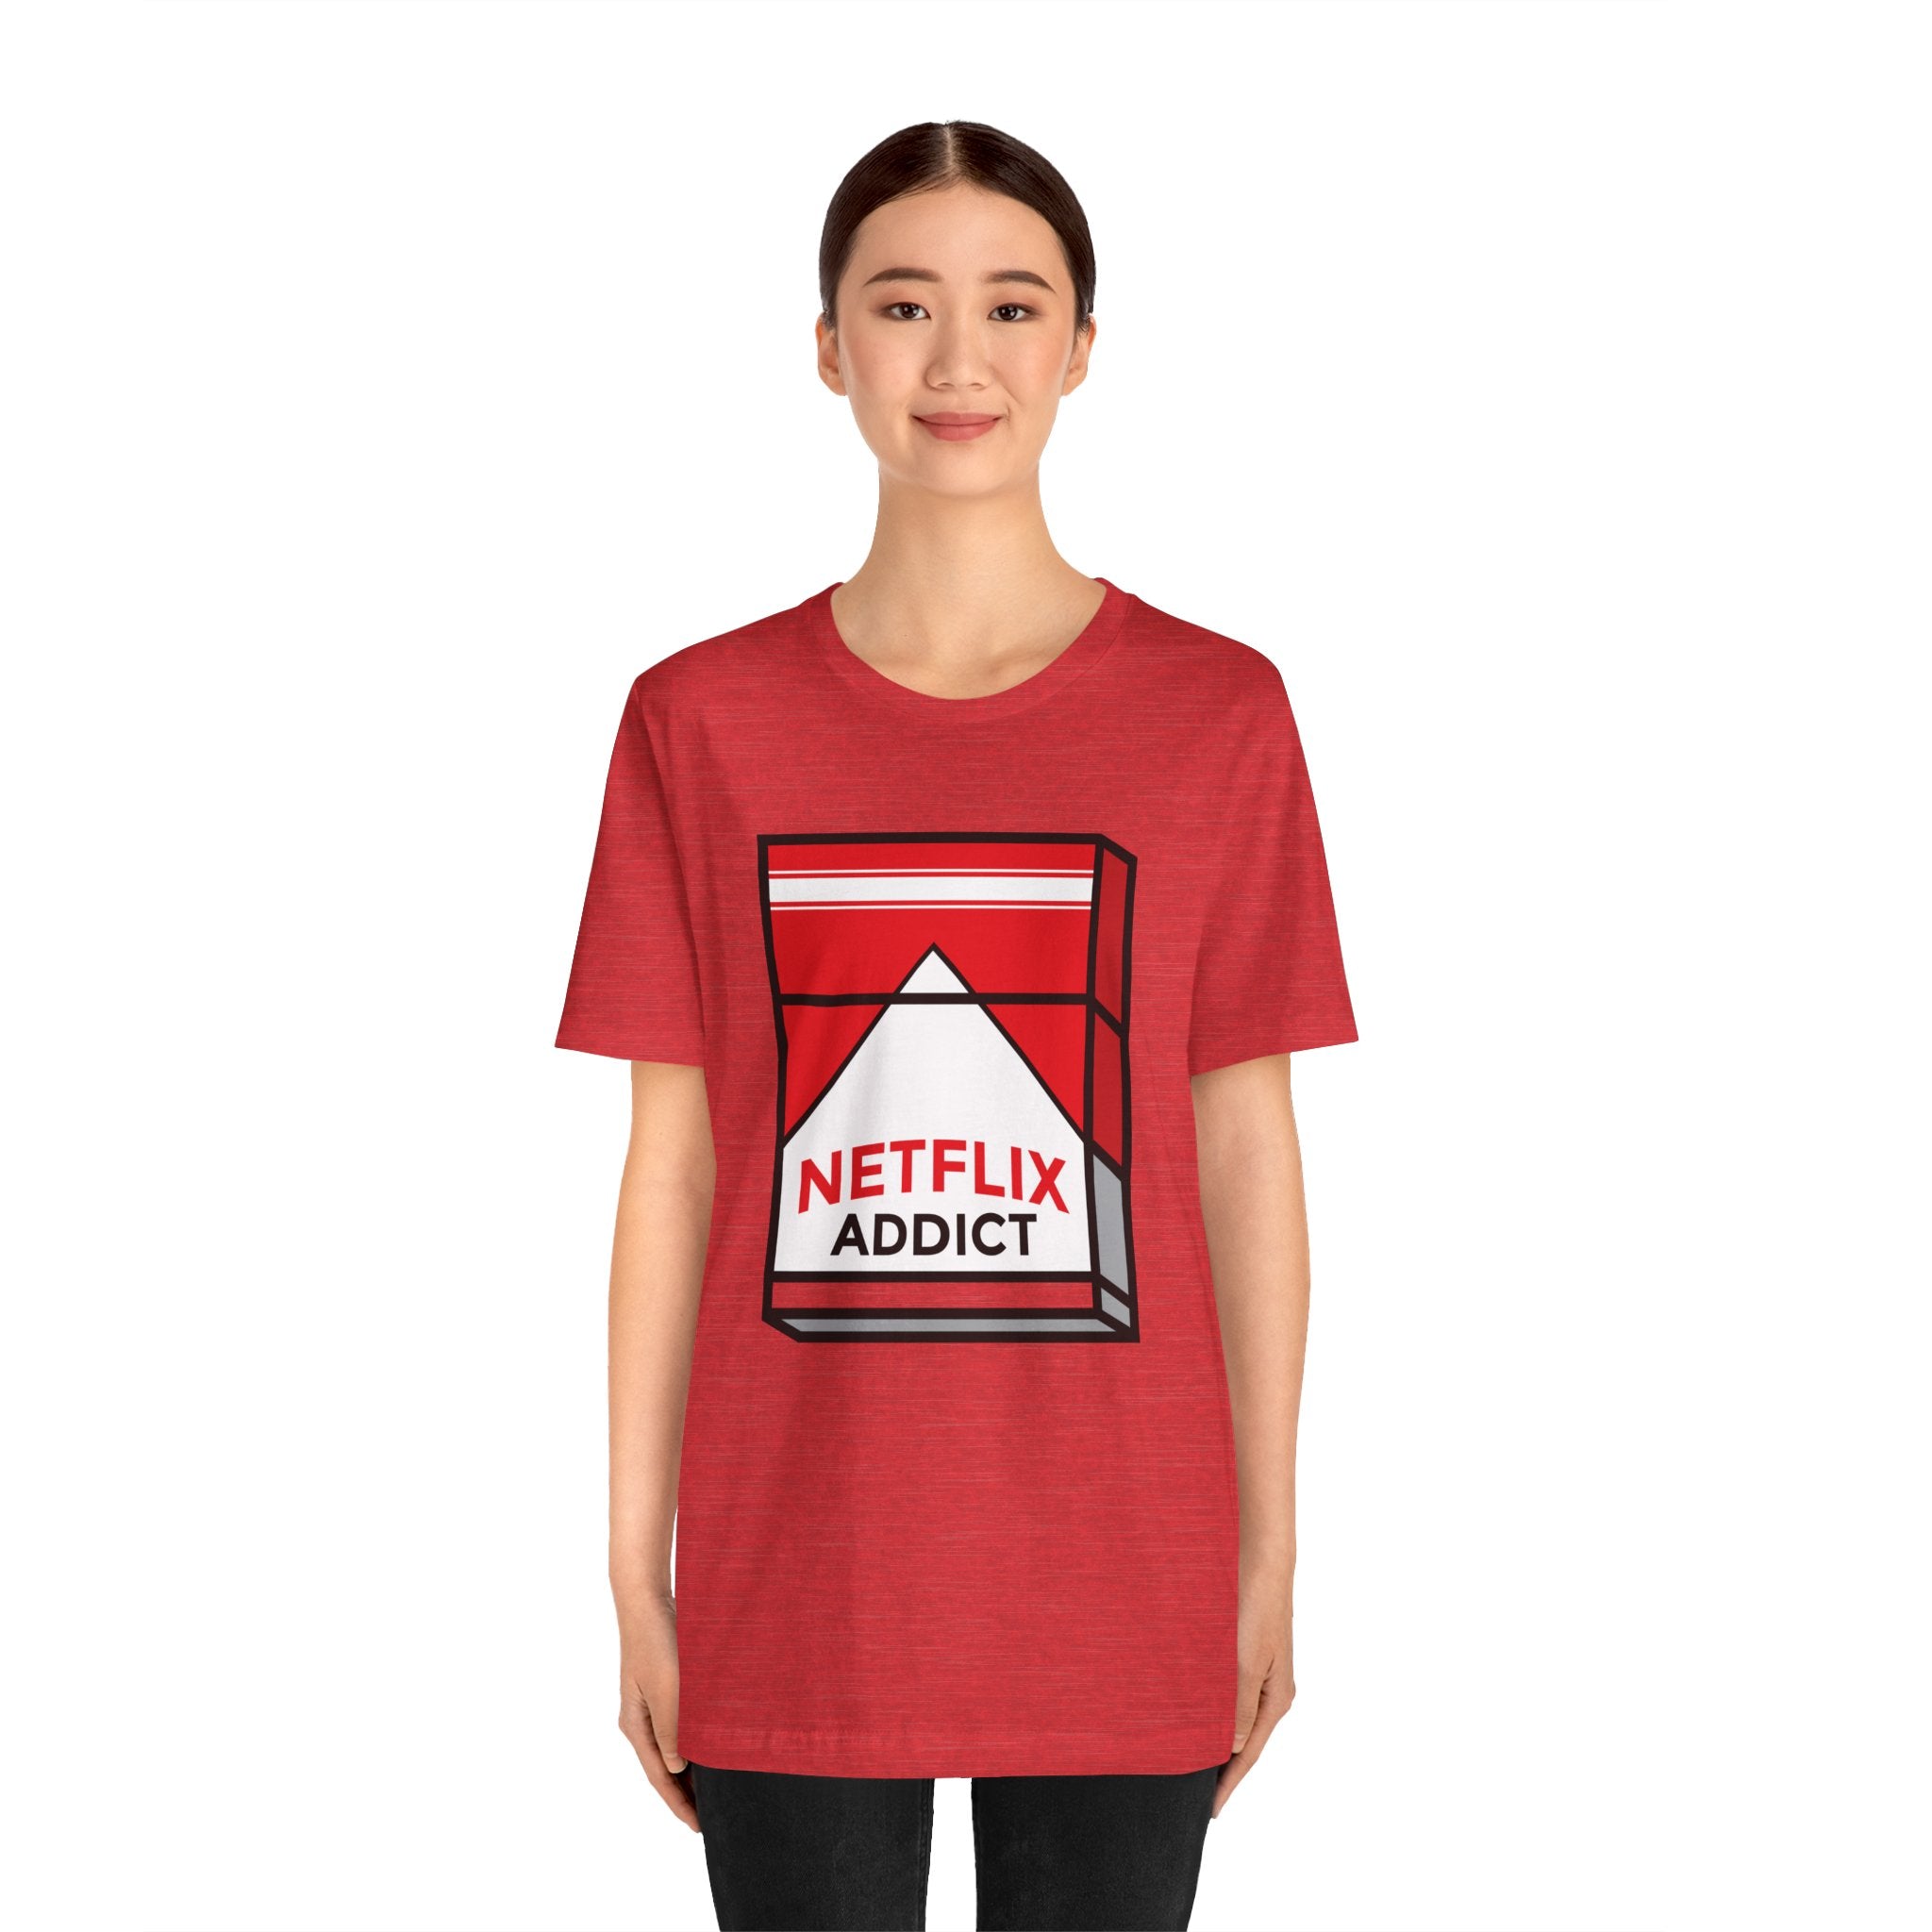 Young woman in a red unisex jersey tee featuring a "Netflix Addict" graphic with a play button symbol.